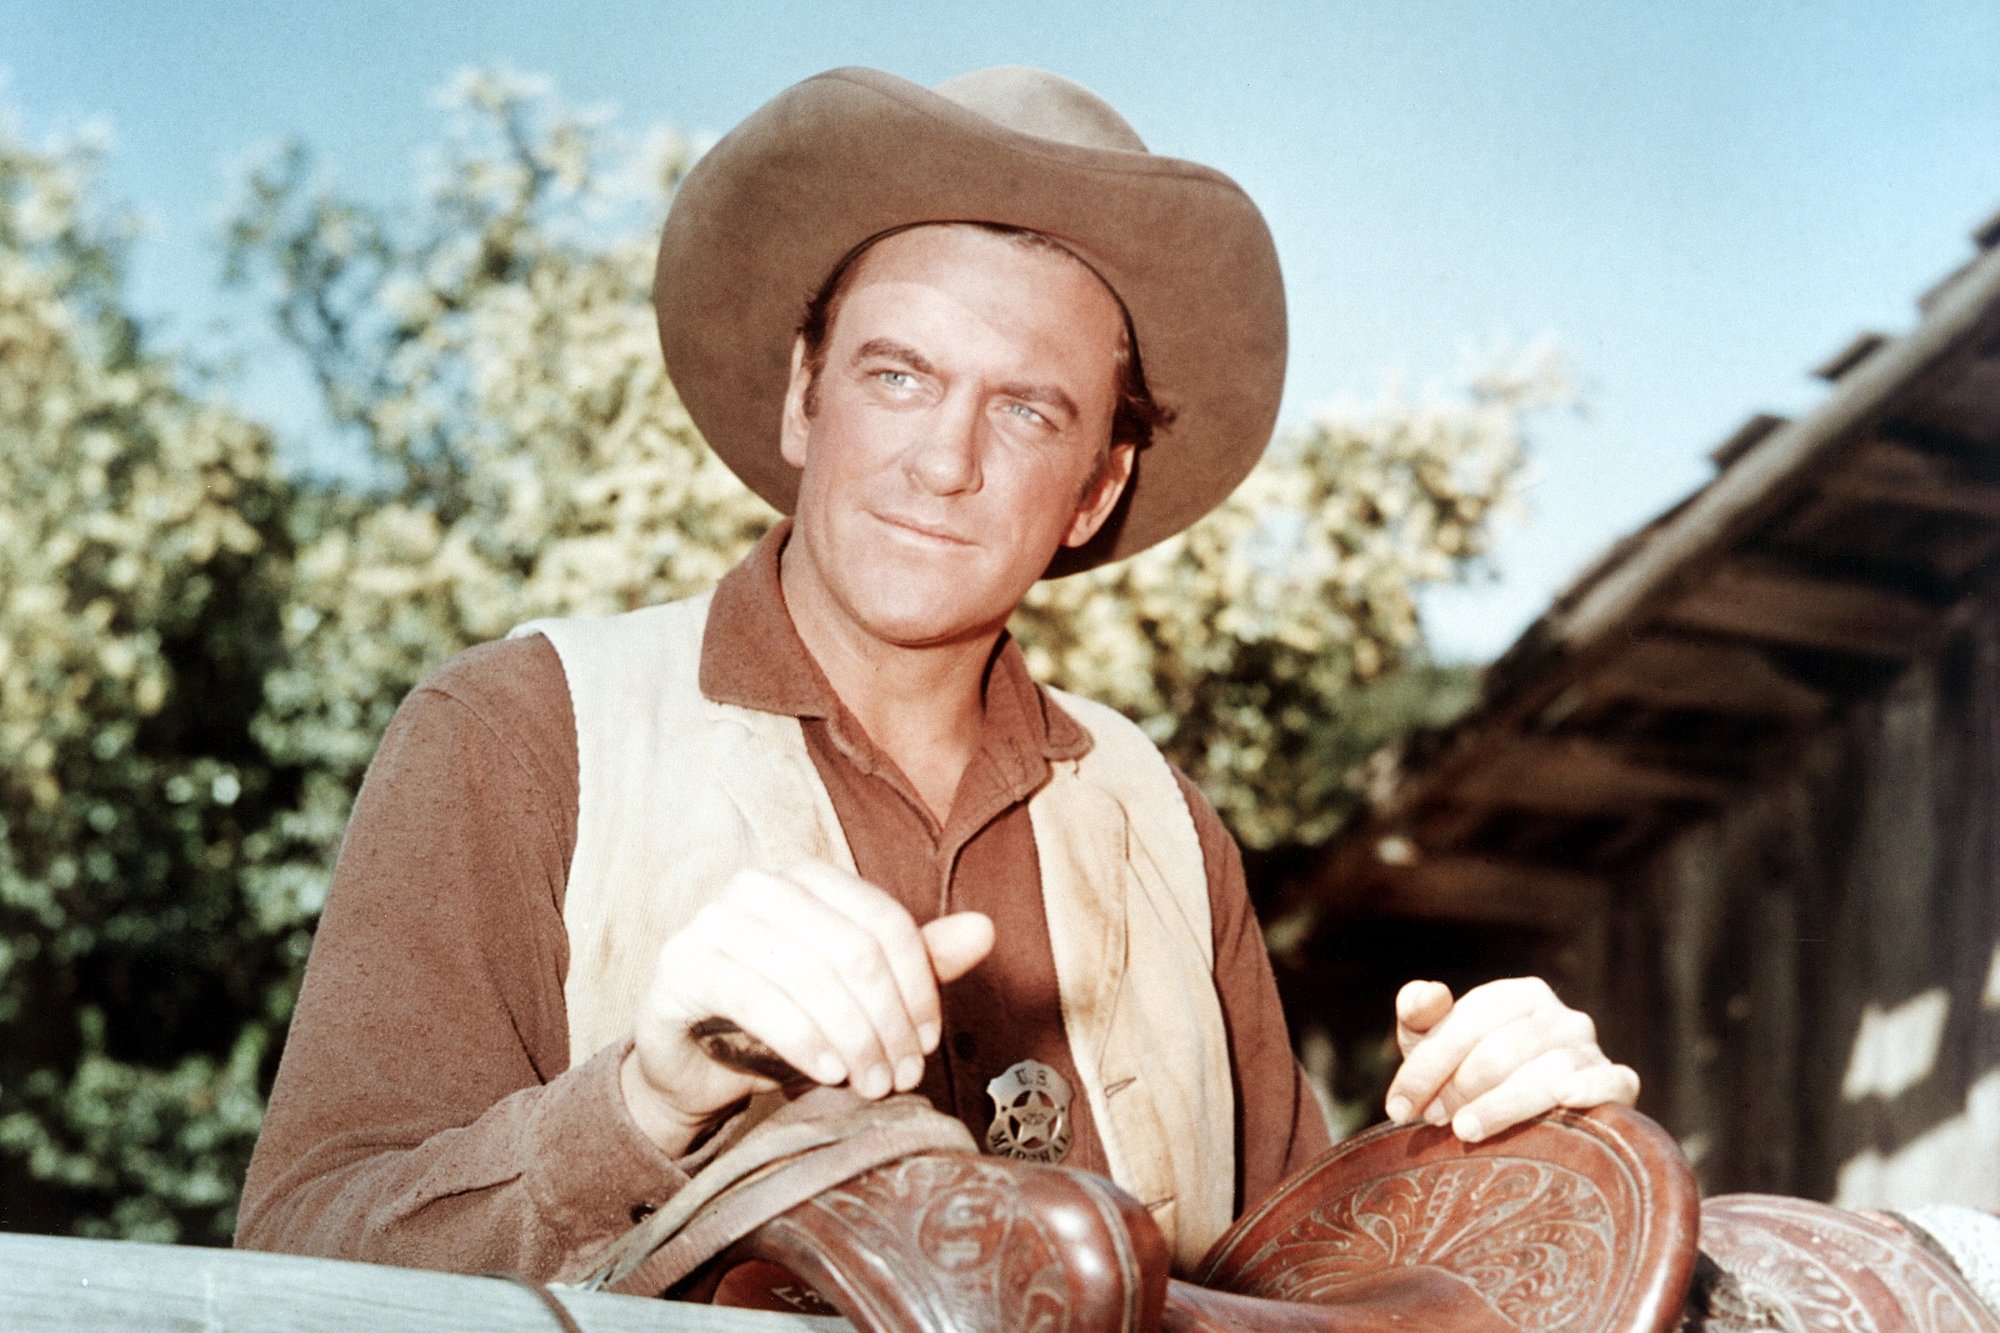 'Gunsmoke' James Arness as Matt Dillon with his hands on a horse saddle. He's wearing a cowboy hat and vest.